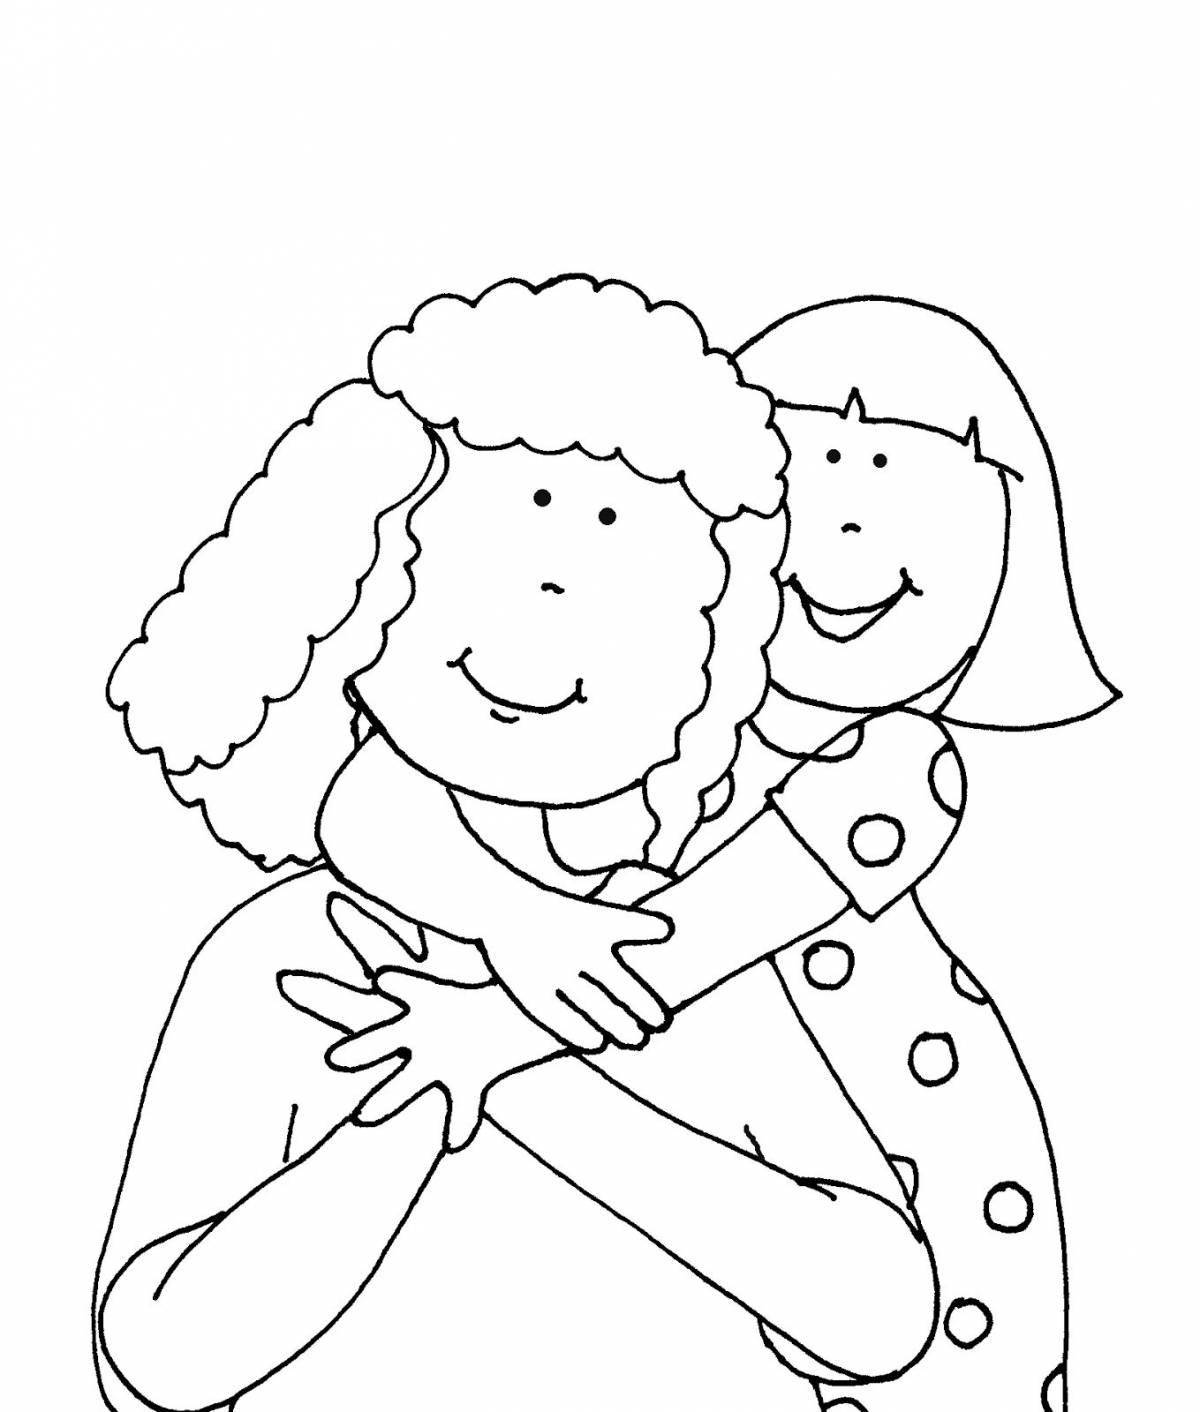 Coloring page violent daughter